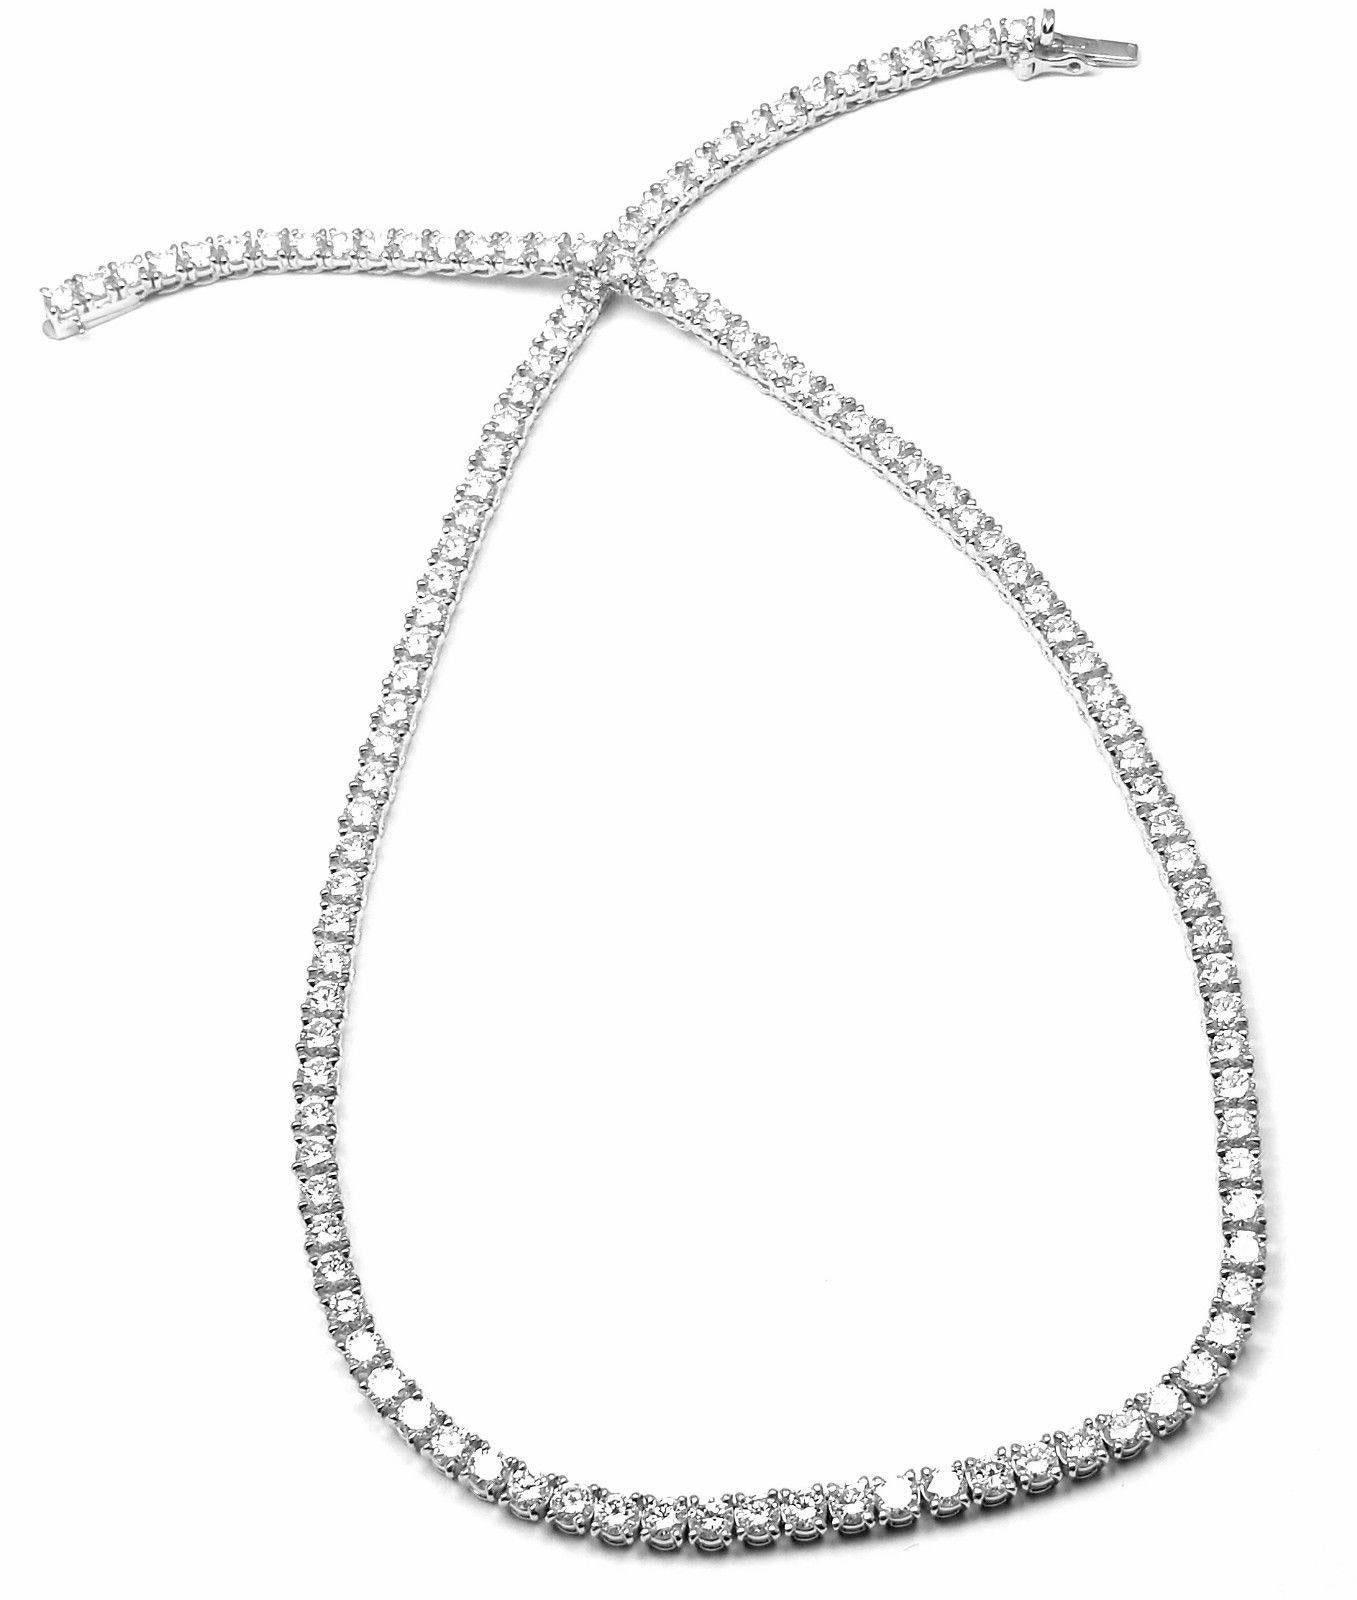 Platinum 15.47ct Diamond Tennis Line Necklace by Cartier.
With 119 round brilliant cut diamonds VVS1 clarity, E color total weight approx. 15.47ct
This necklace comes with an original Cartier box and a Cartier service paper from Cartier NY.

The